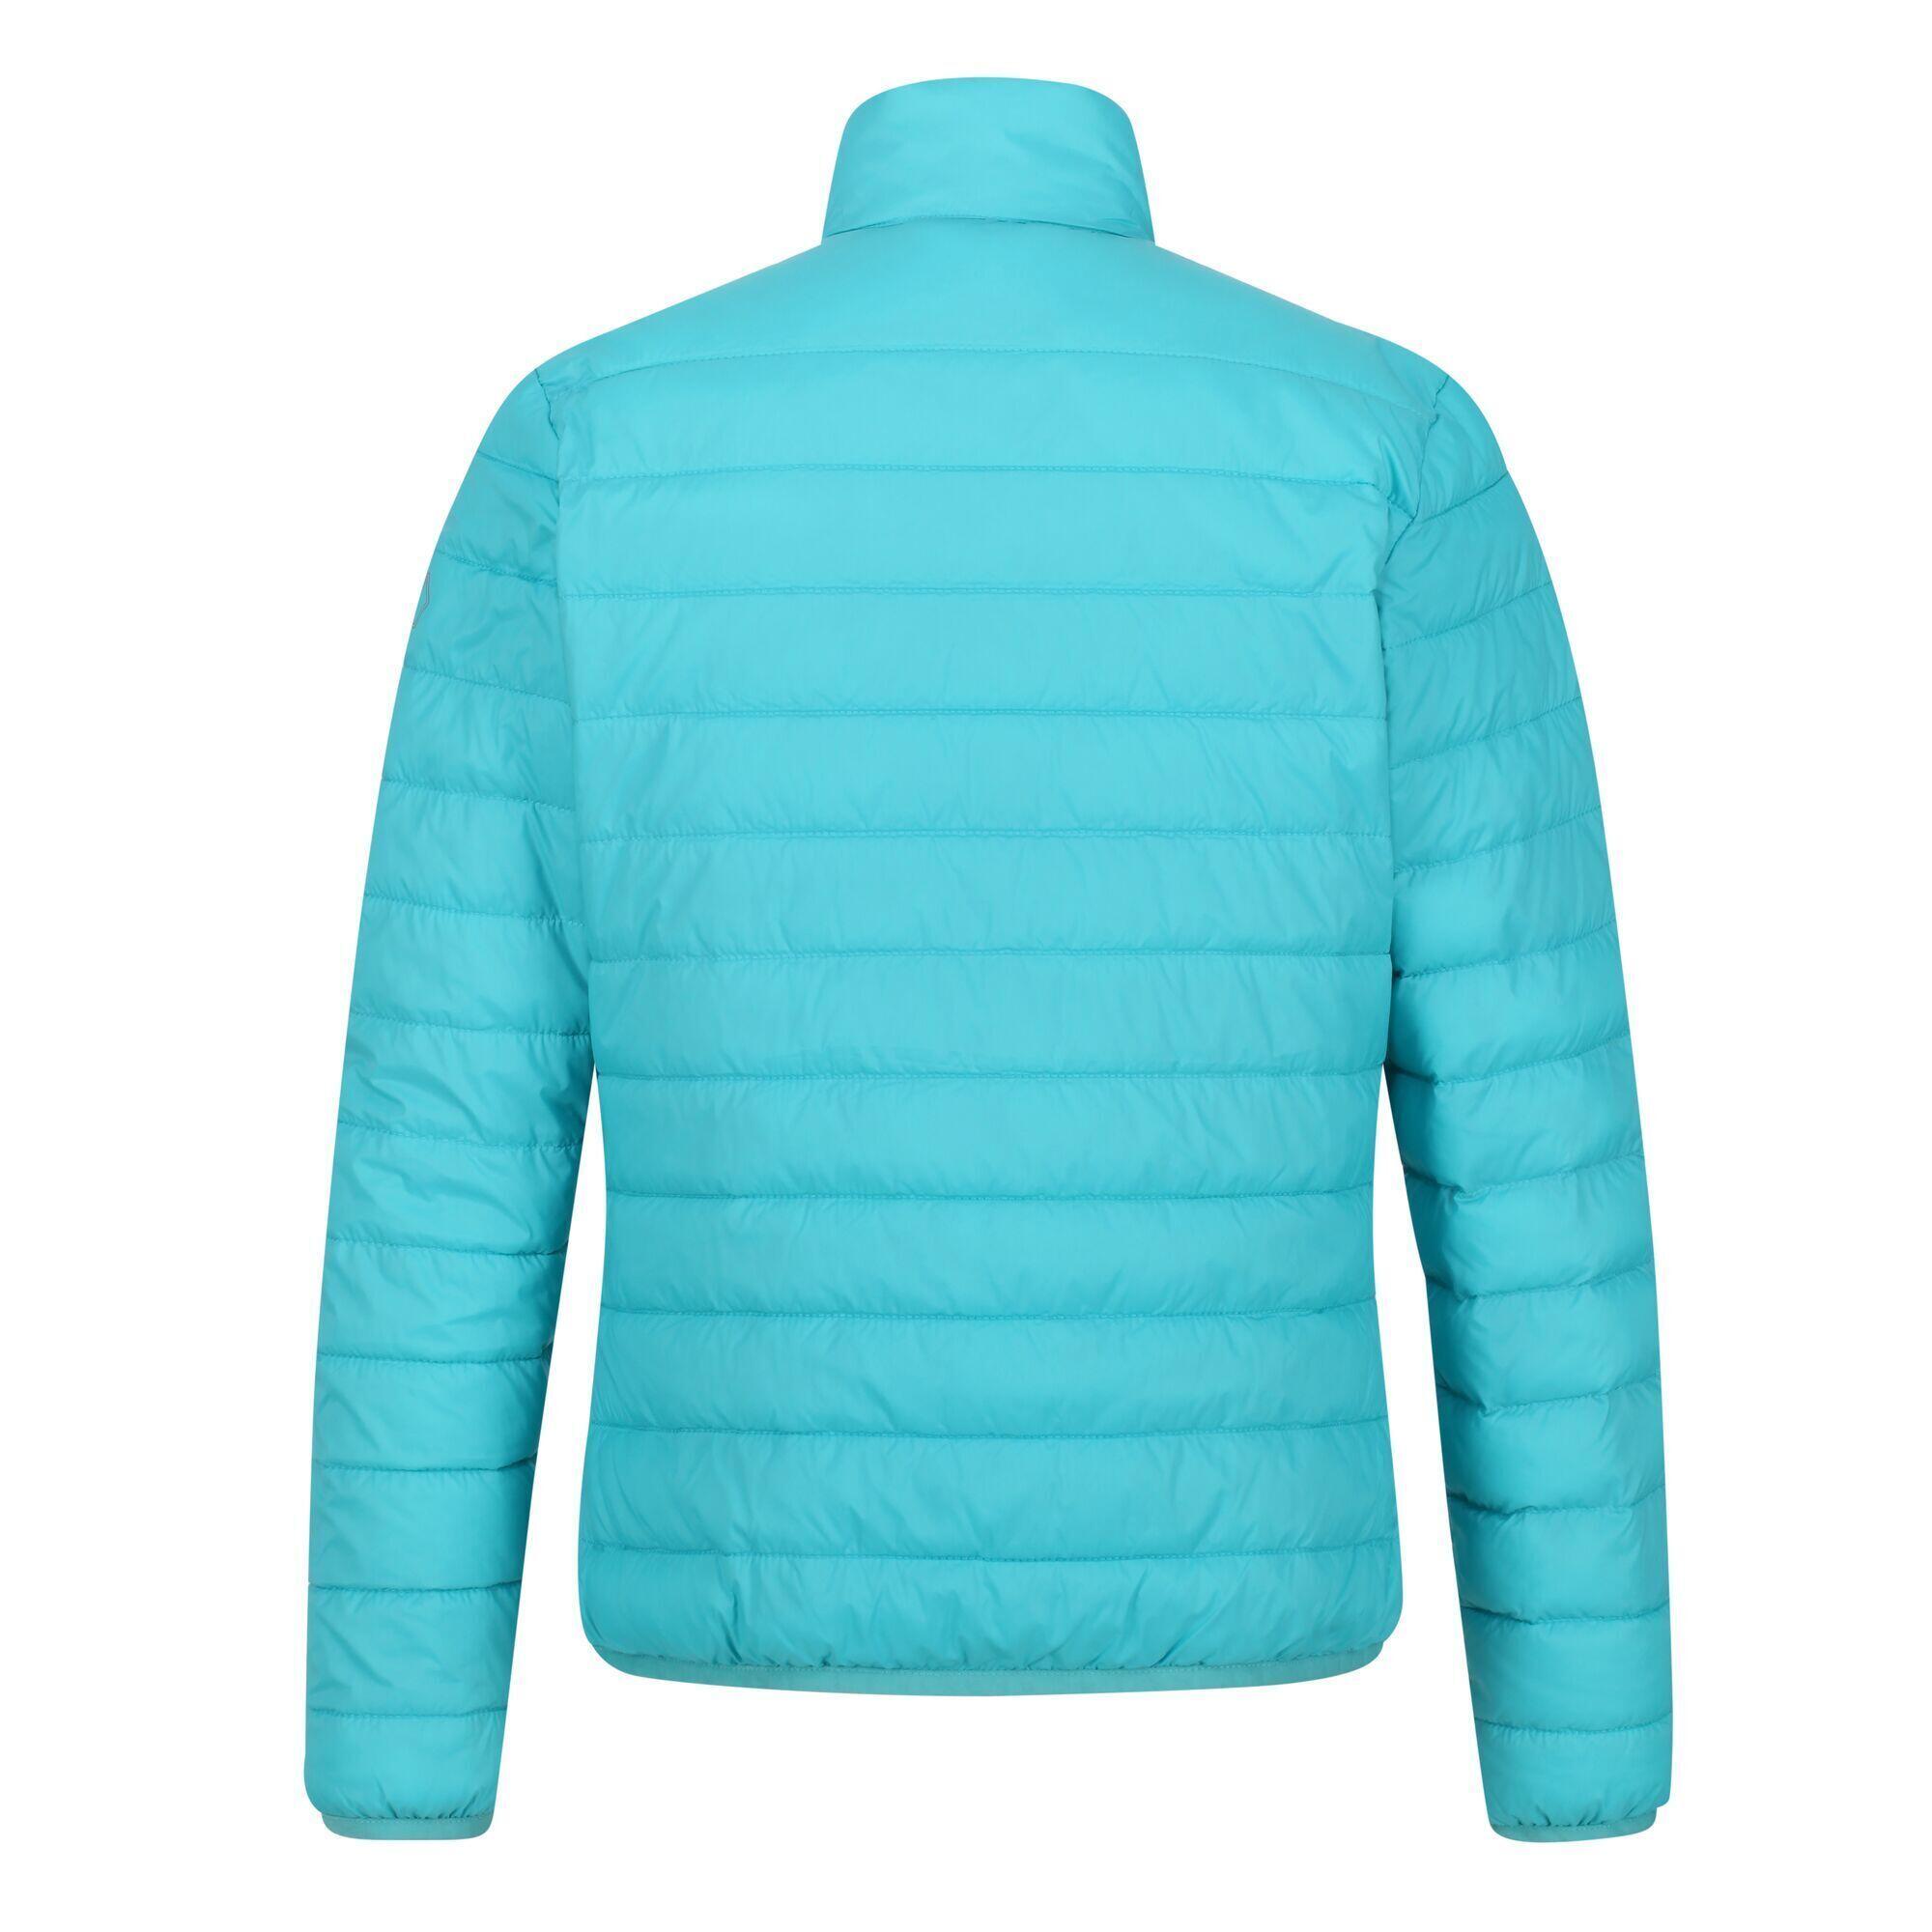 Womens/Ladies Hillpack Padded Jacket (Turquoise) 2/4